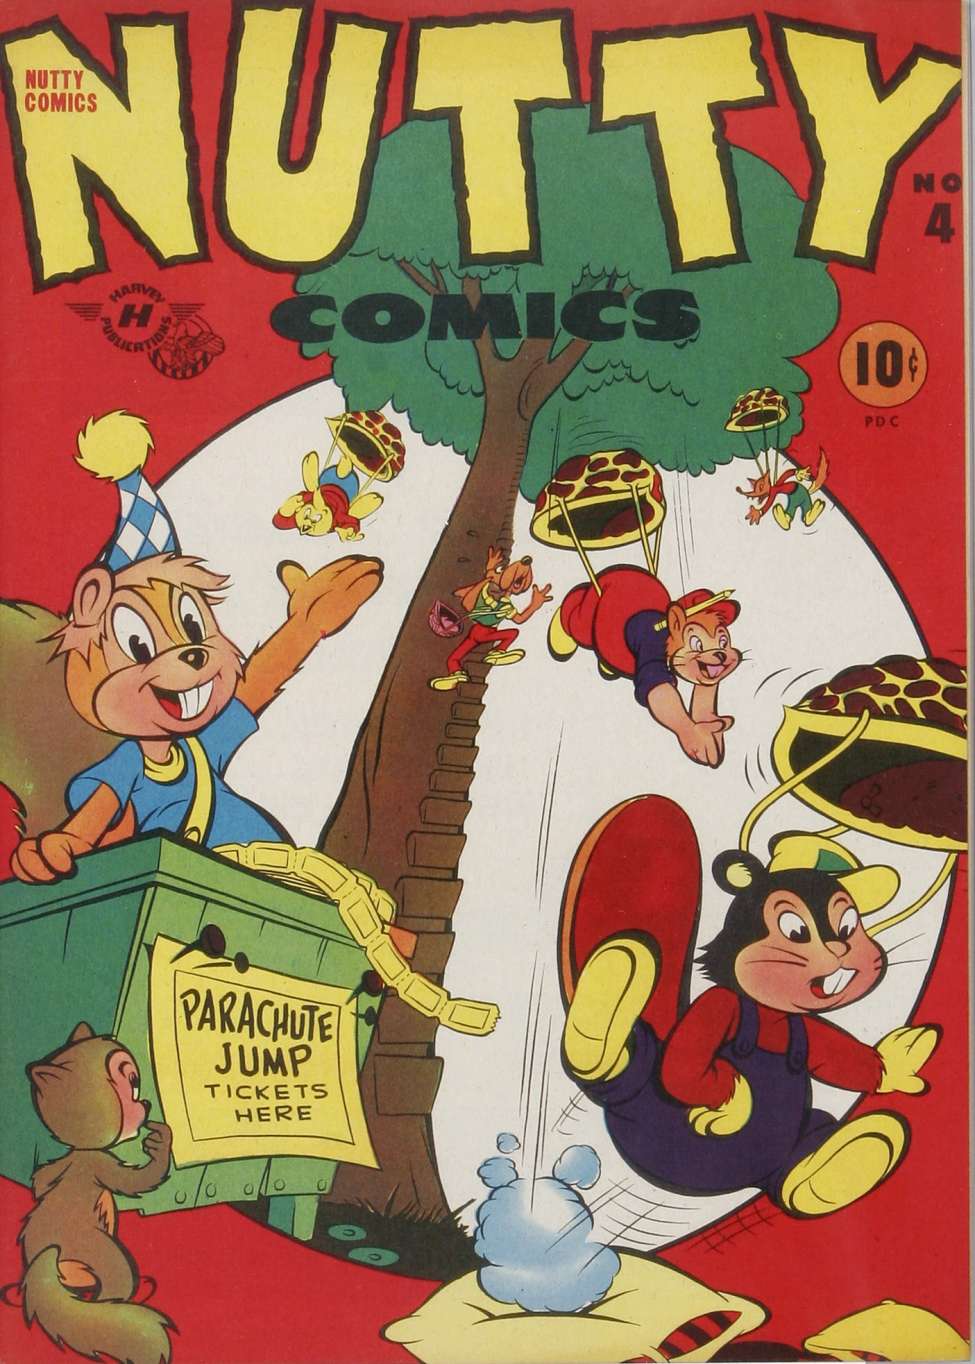 Book Cover For Nutty Comics 4